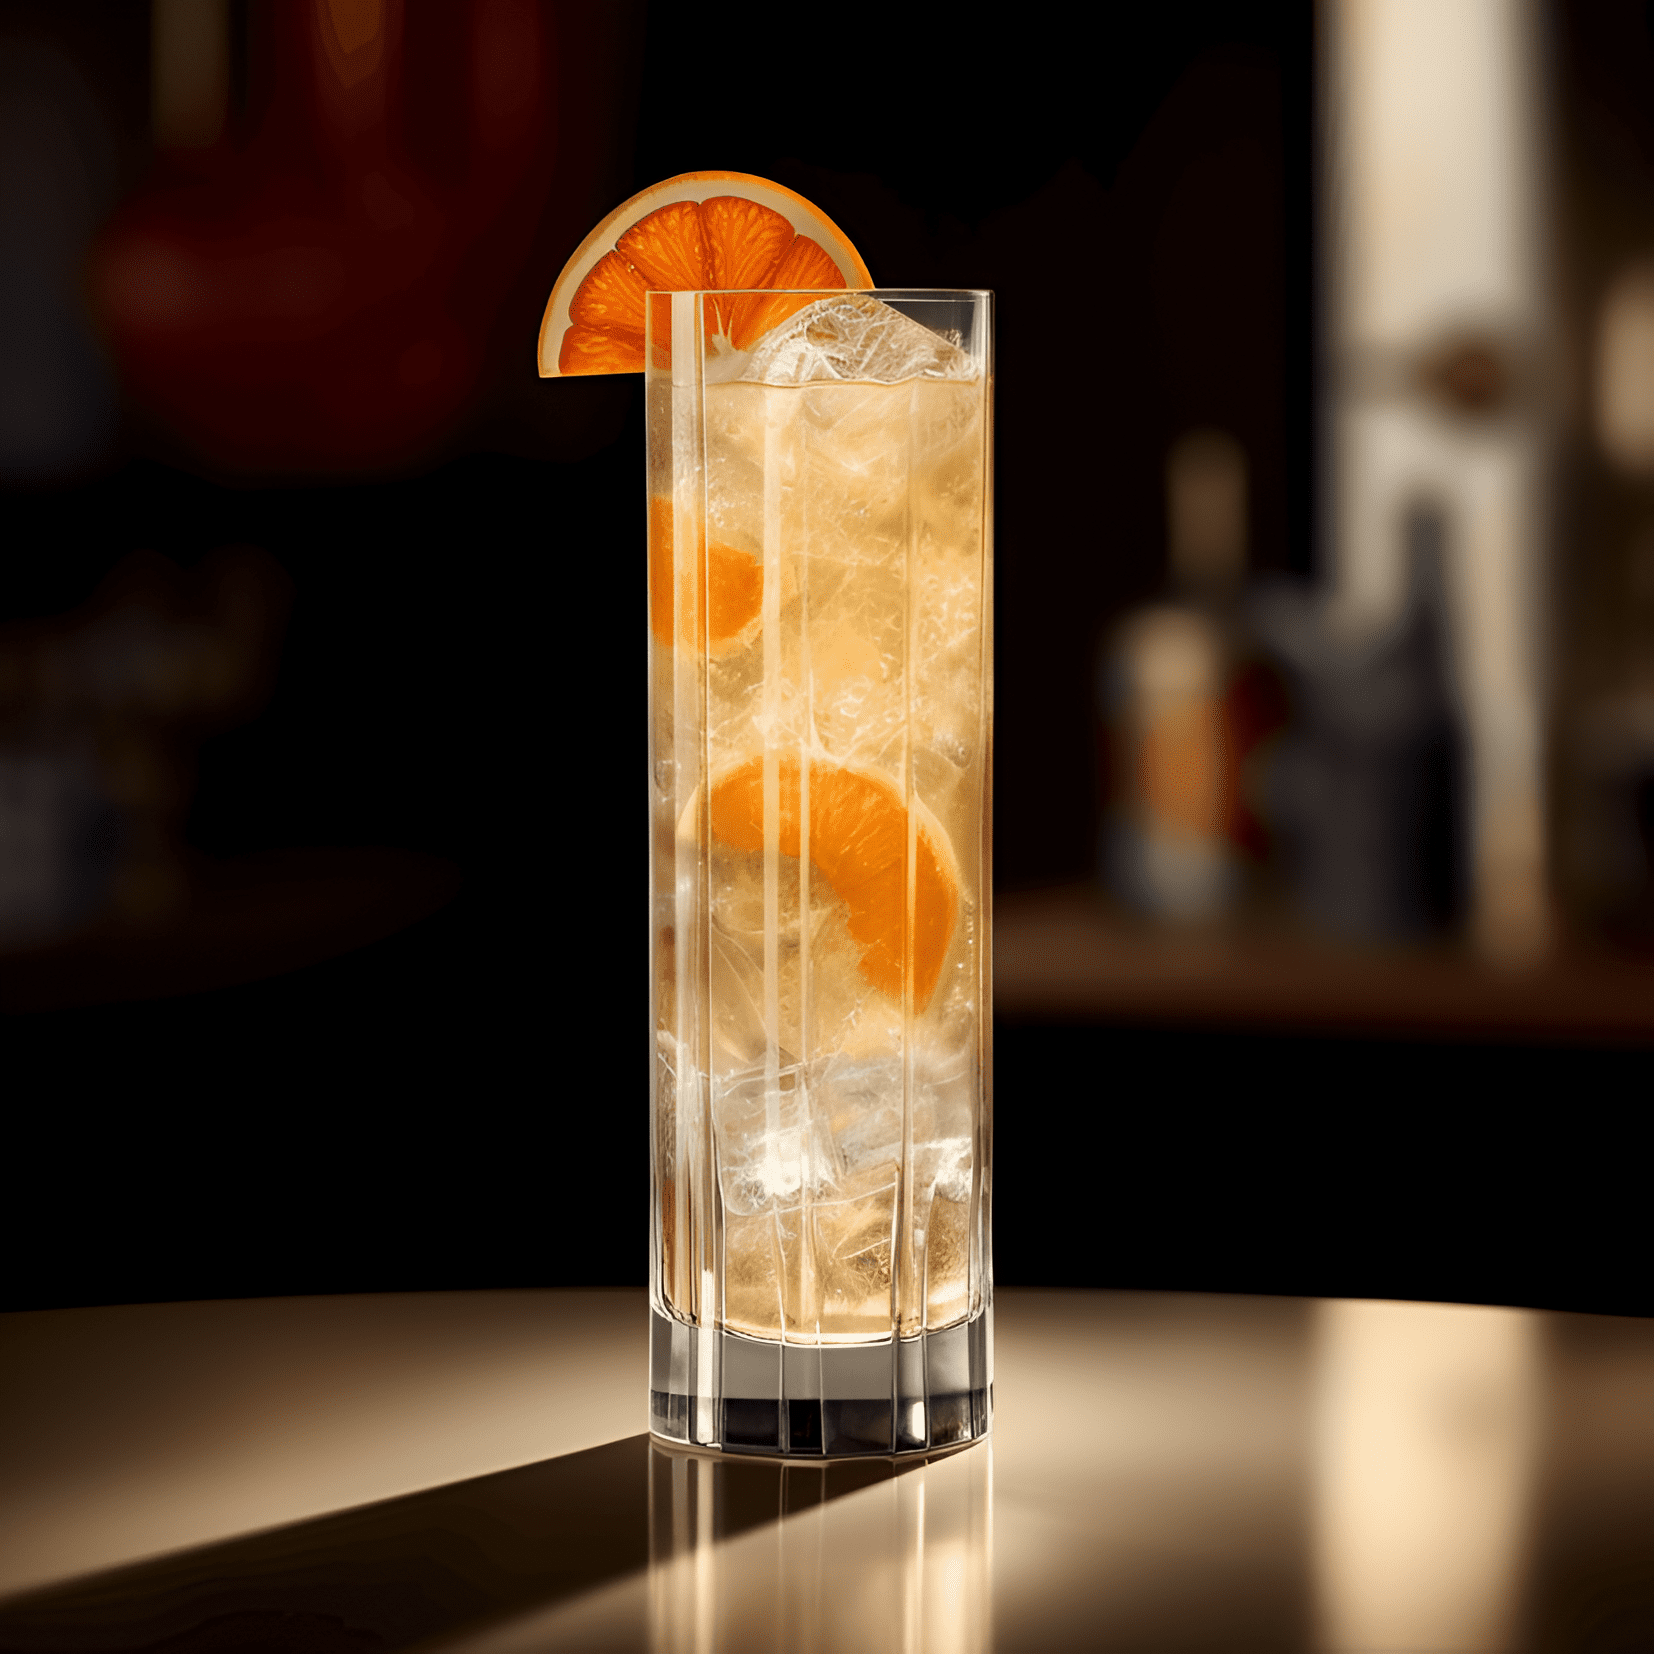 Cointreau Cooler Cocktail Recipe - The Cointreau Cooler has a bright, citrusy taste with a hint of sweetness. It is light and refreshing, with a subtle orange flavor and a slightly tart finish.